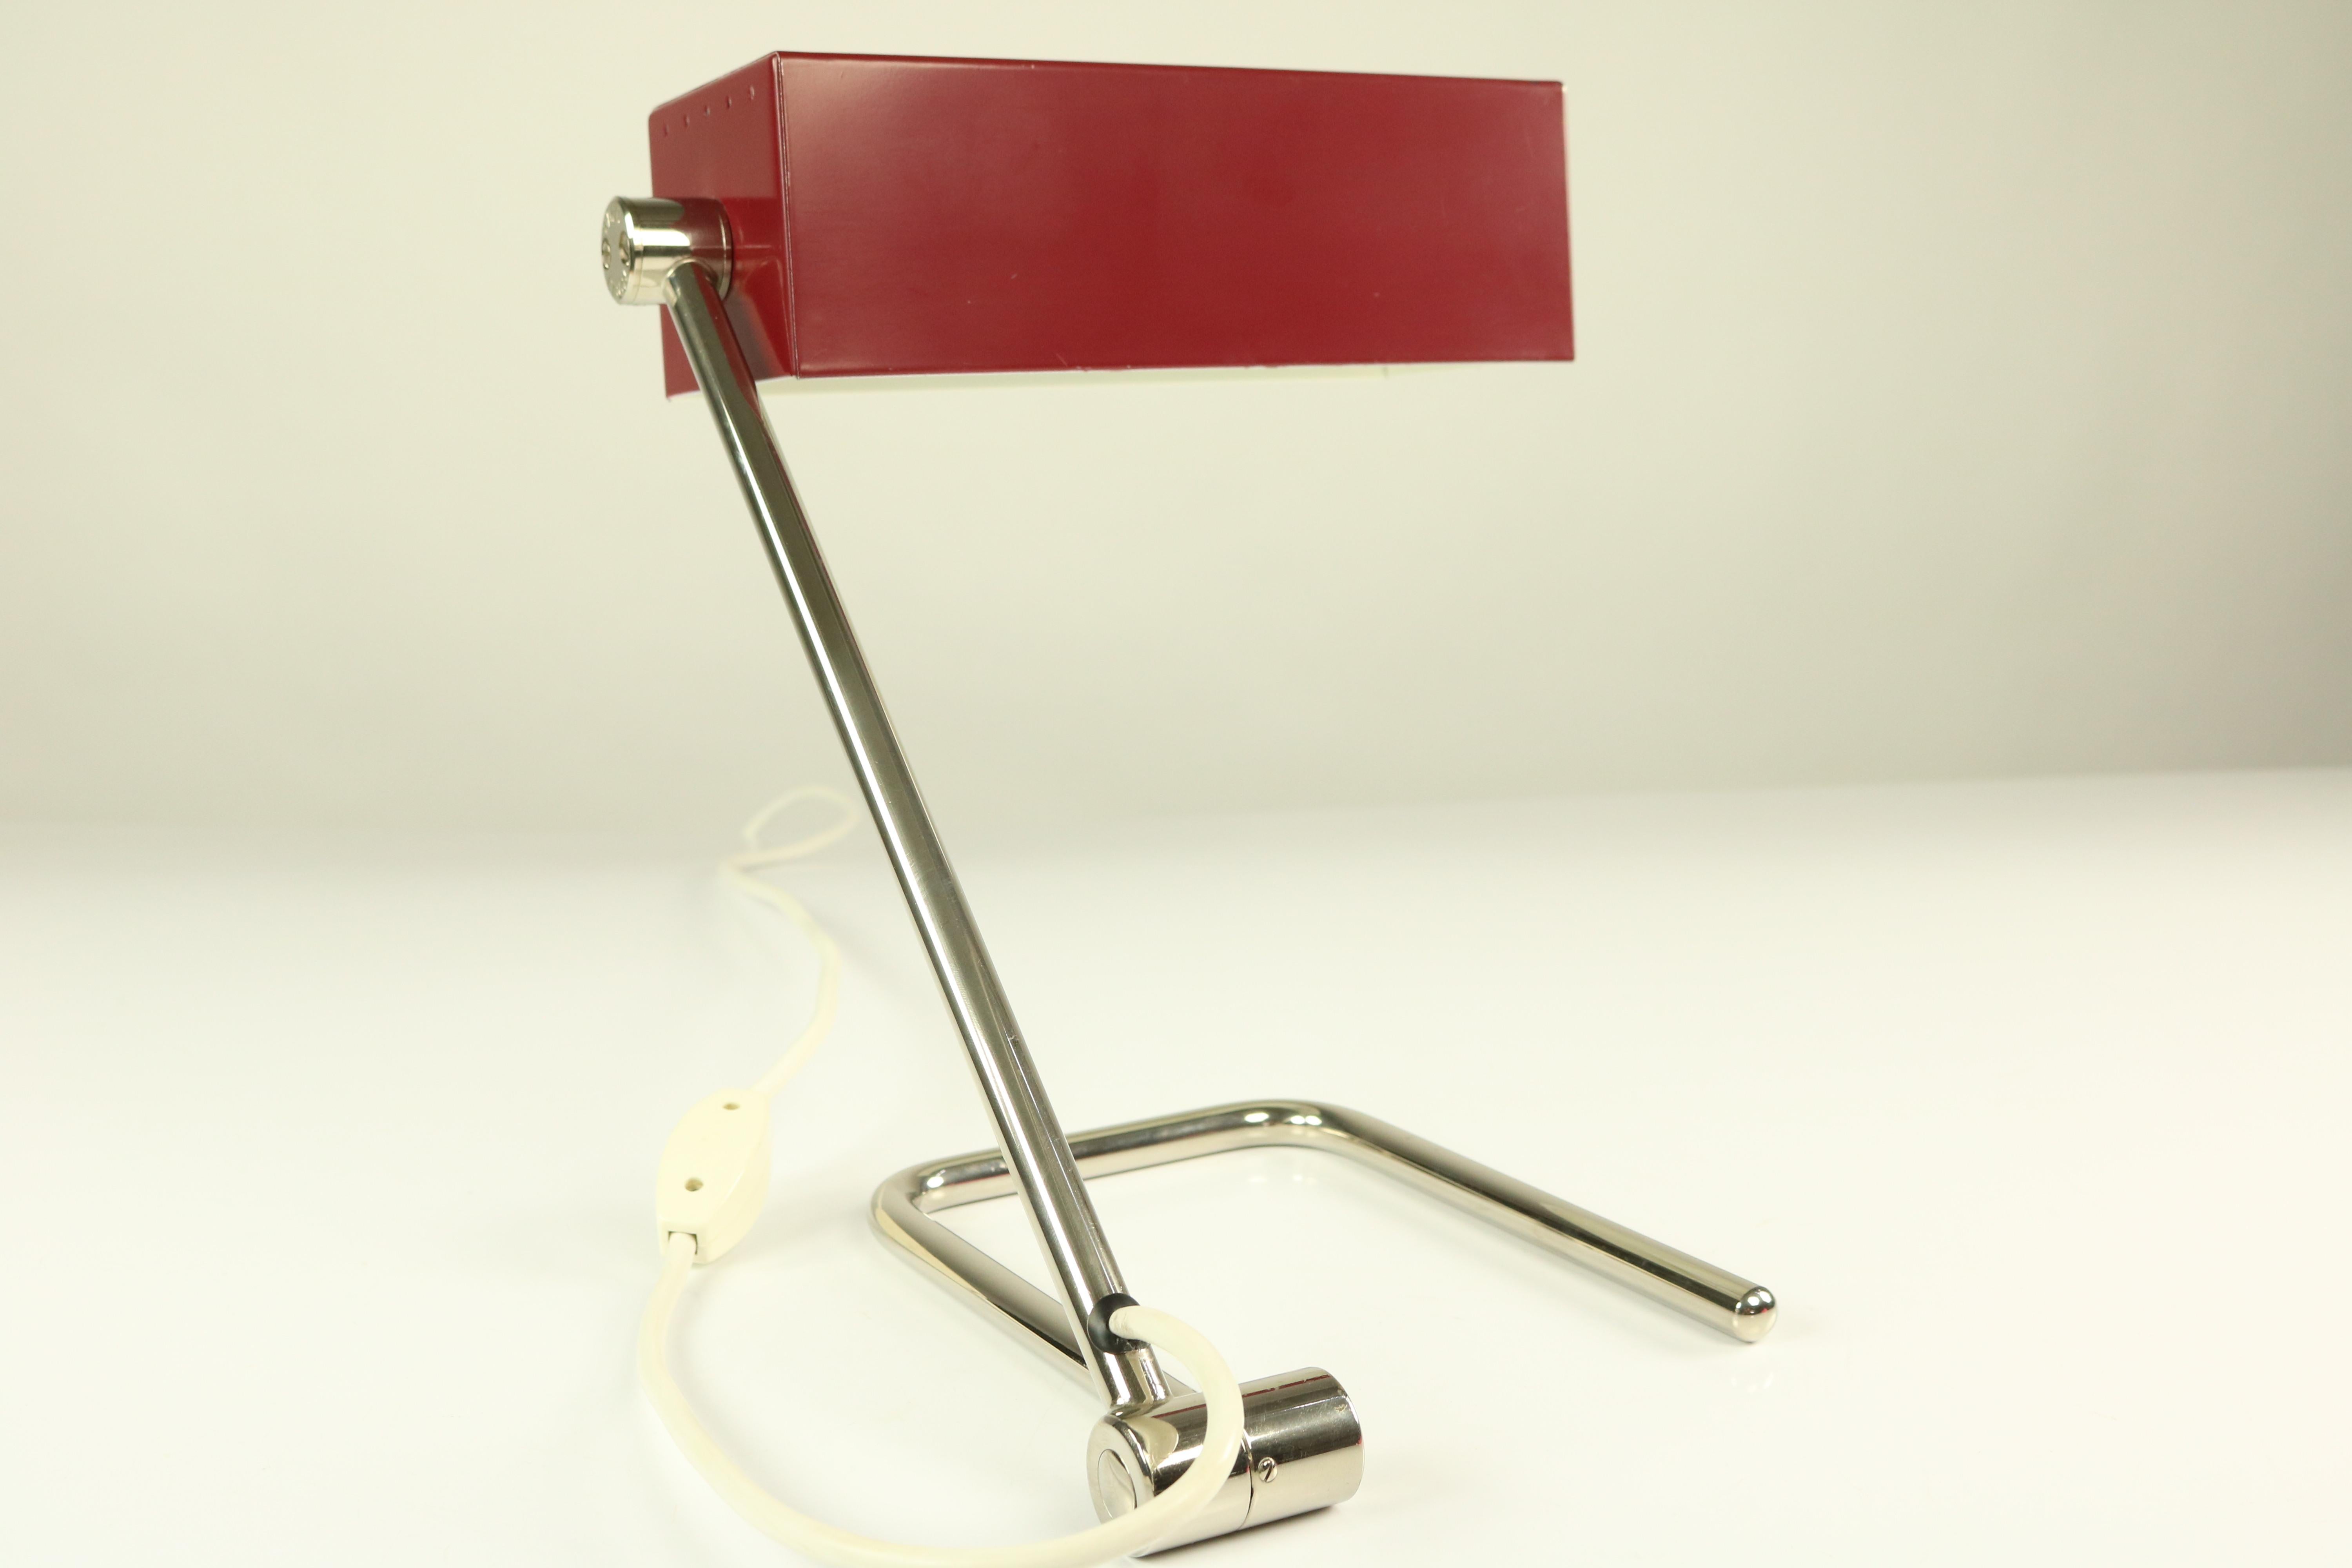 Brass Midcentury Table Lamp by Hala Germany Wine Red and Chrome Vintage, 1950s-1960s For Sale